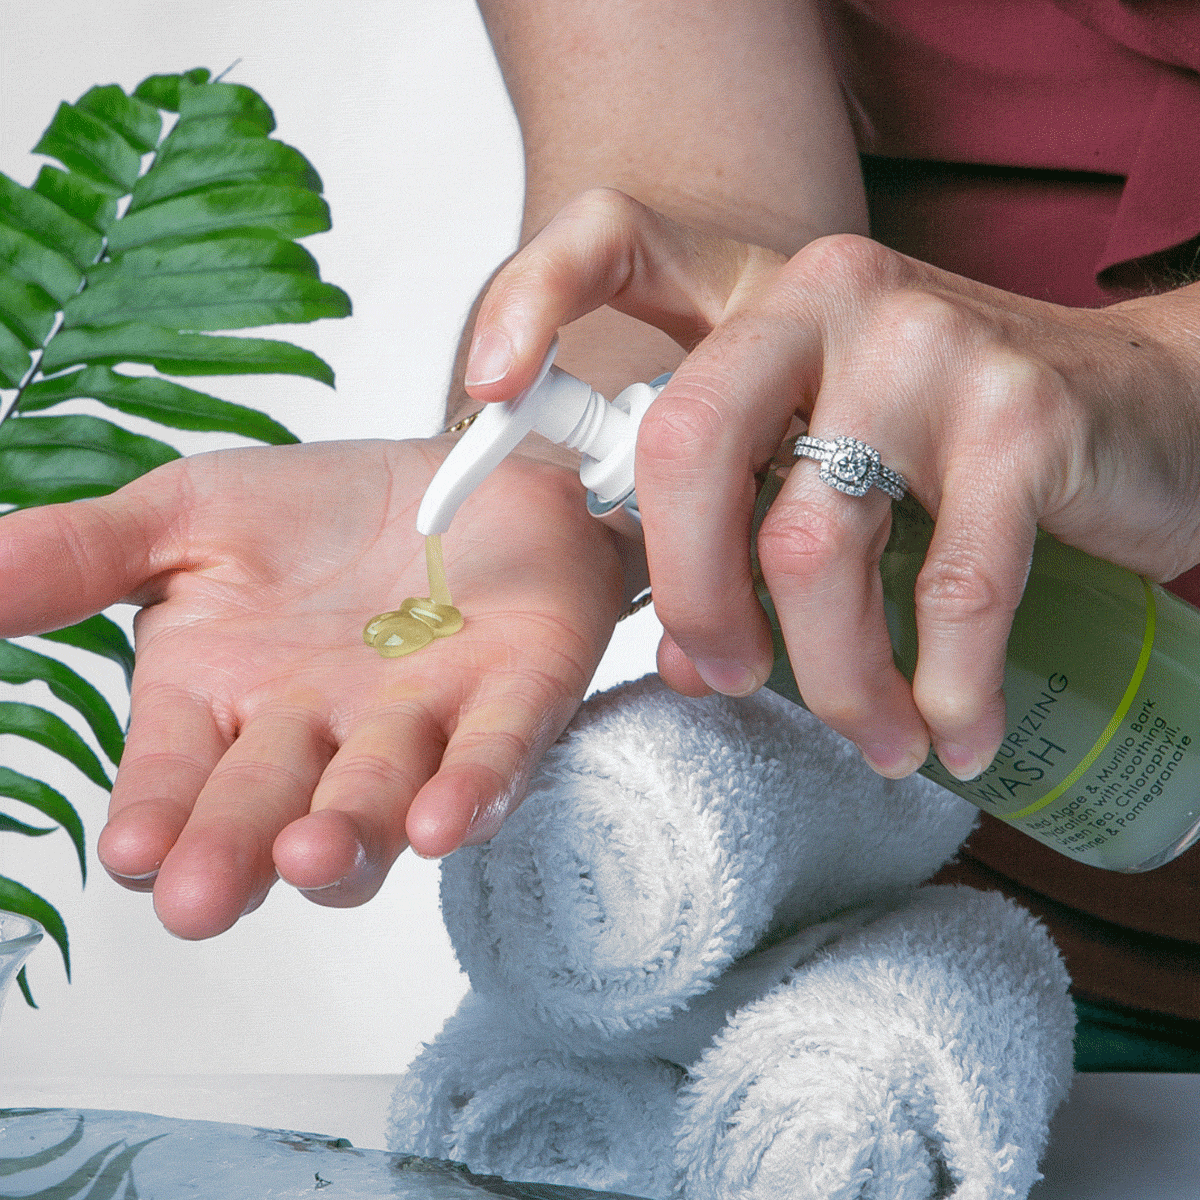 an image of IN YOUR FACE MOISTURIZING WASH being pumped into a palm.